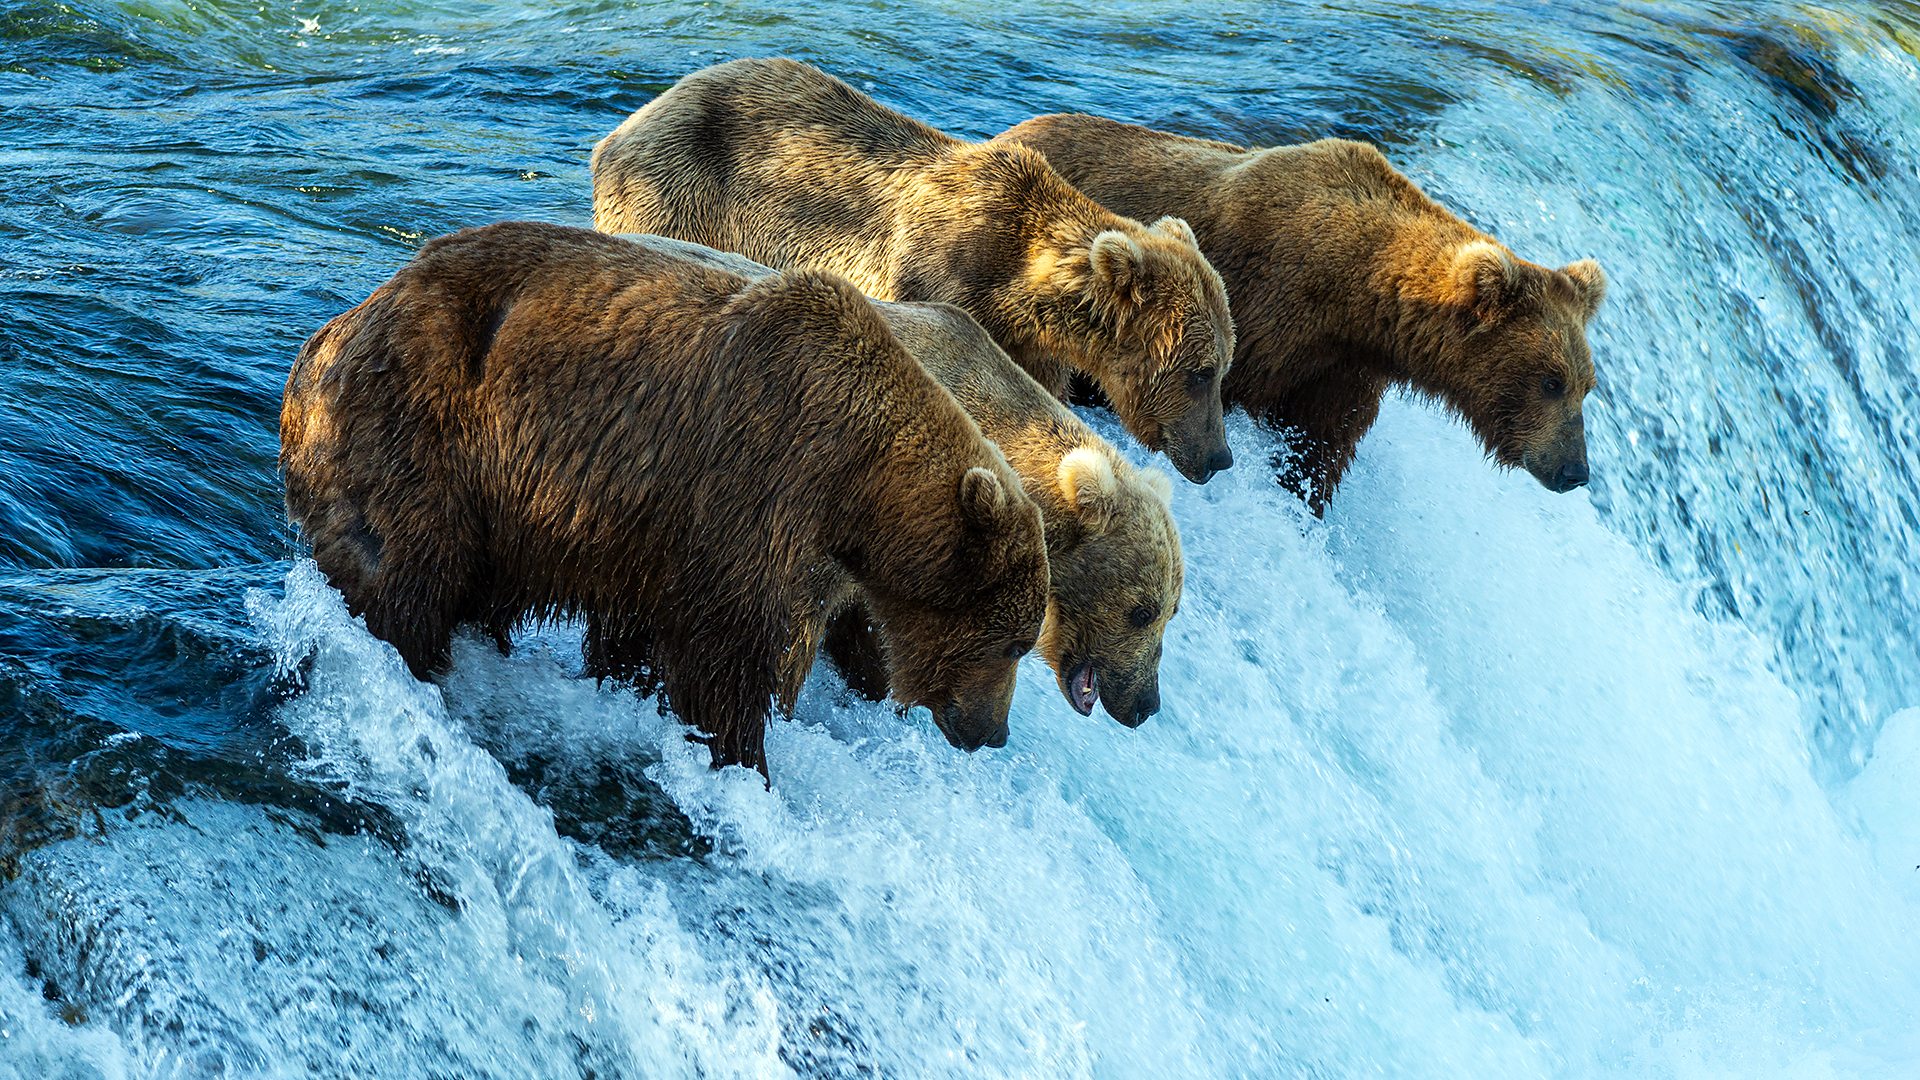 Bears line up at a waterfall in Katmai National Park (Credit: N. Boak)